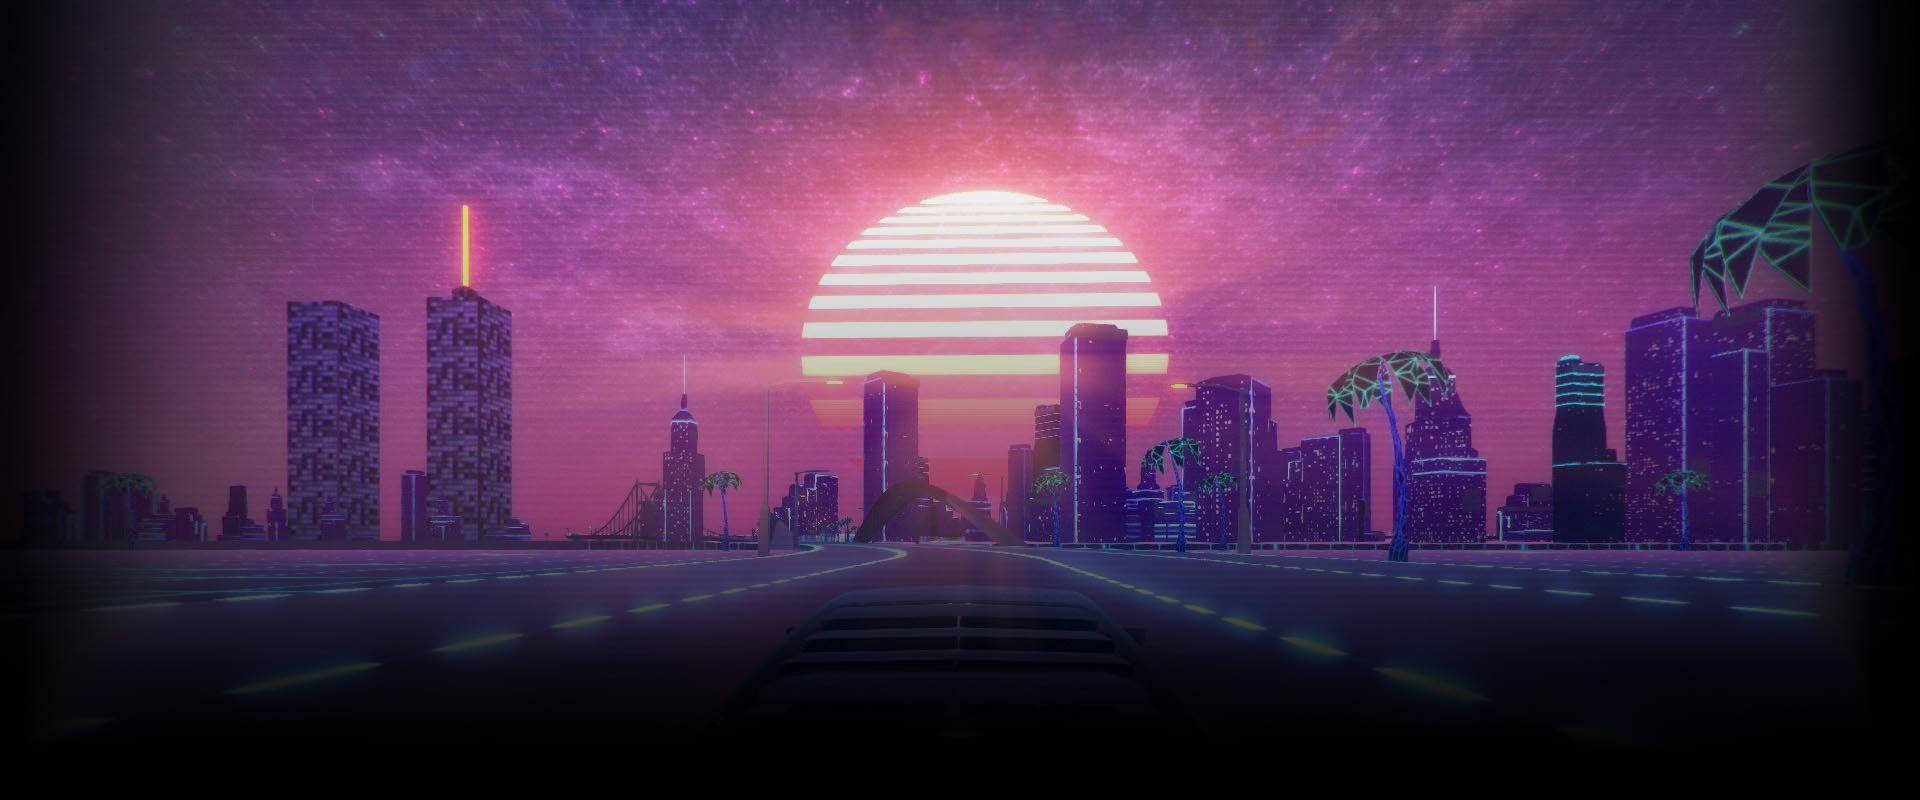 Aesthetic Profile Picture Vaporwave City Sunset Background